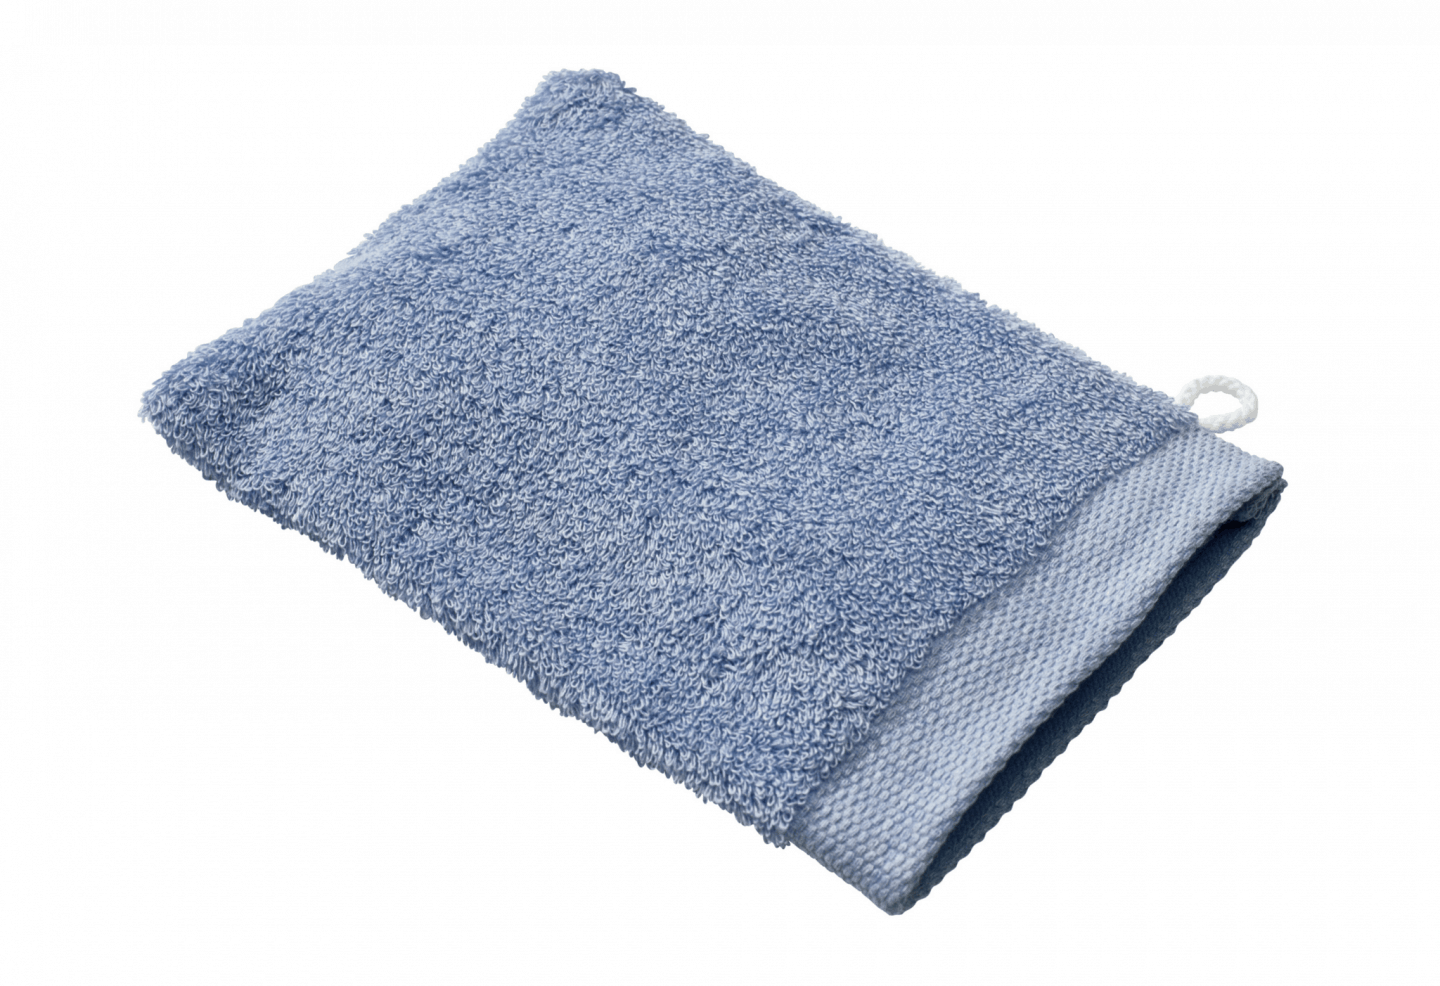 a blue washcloth as a sustainable alternative to plastic sponges